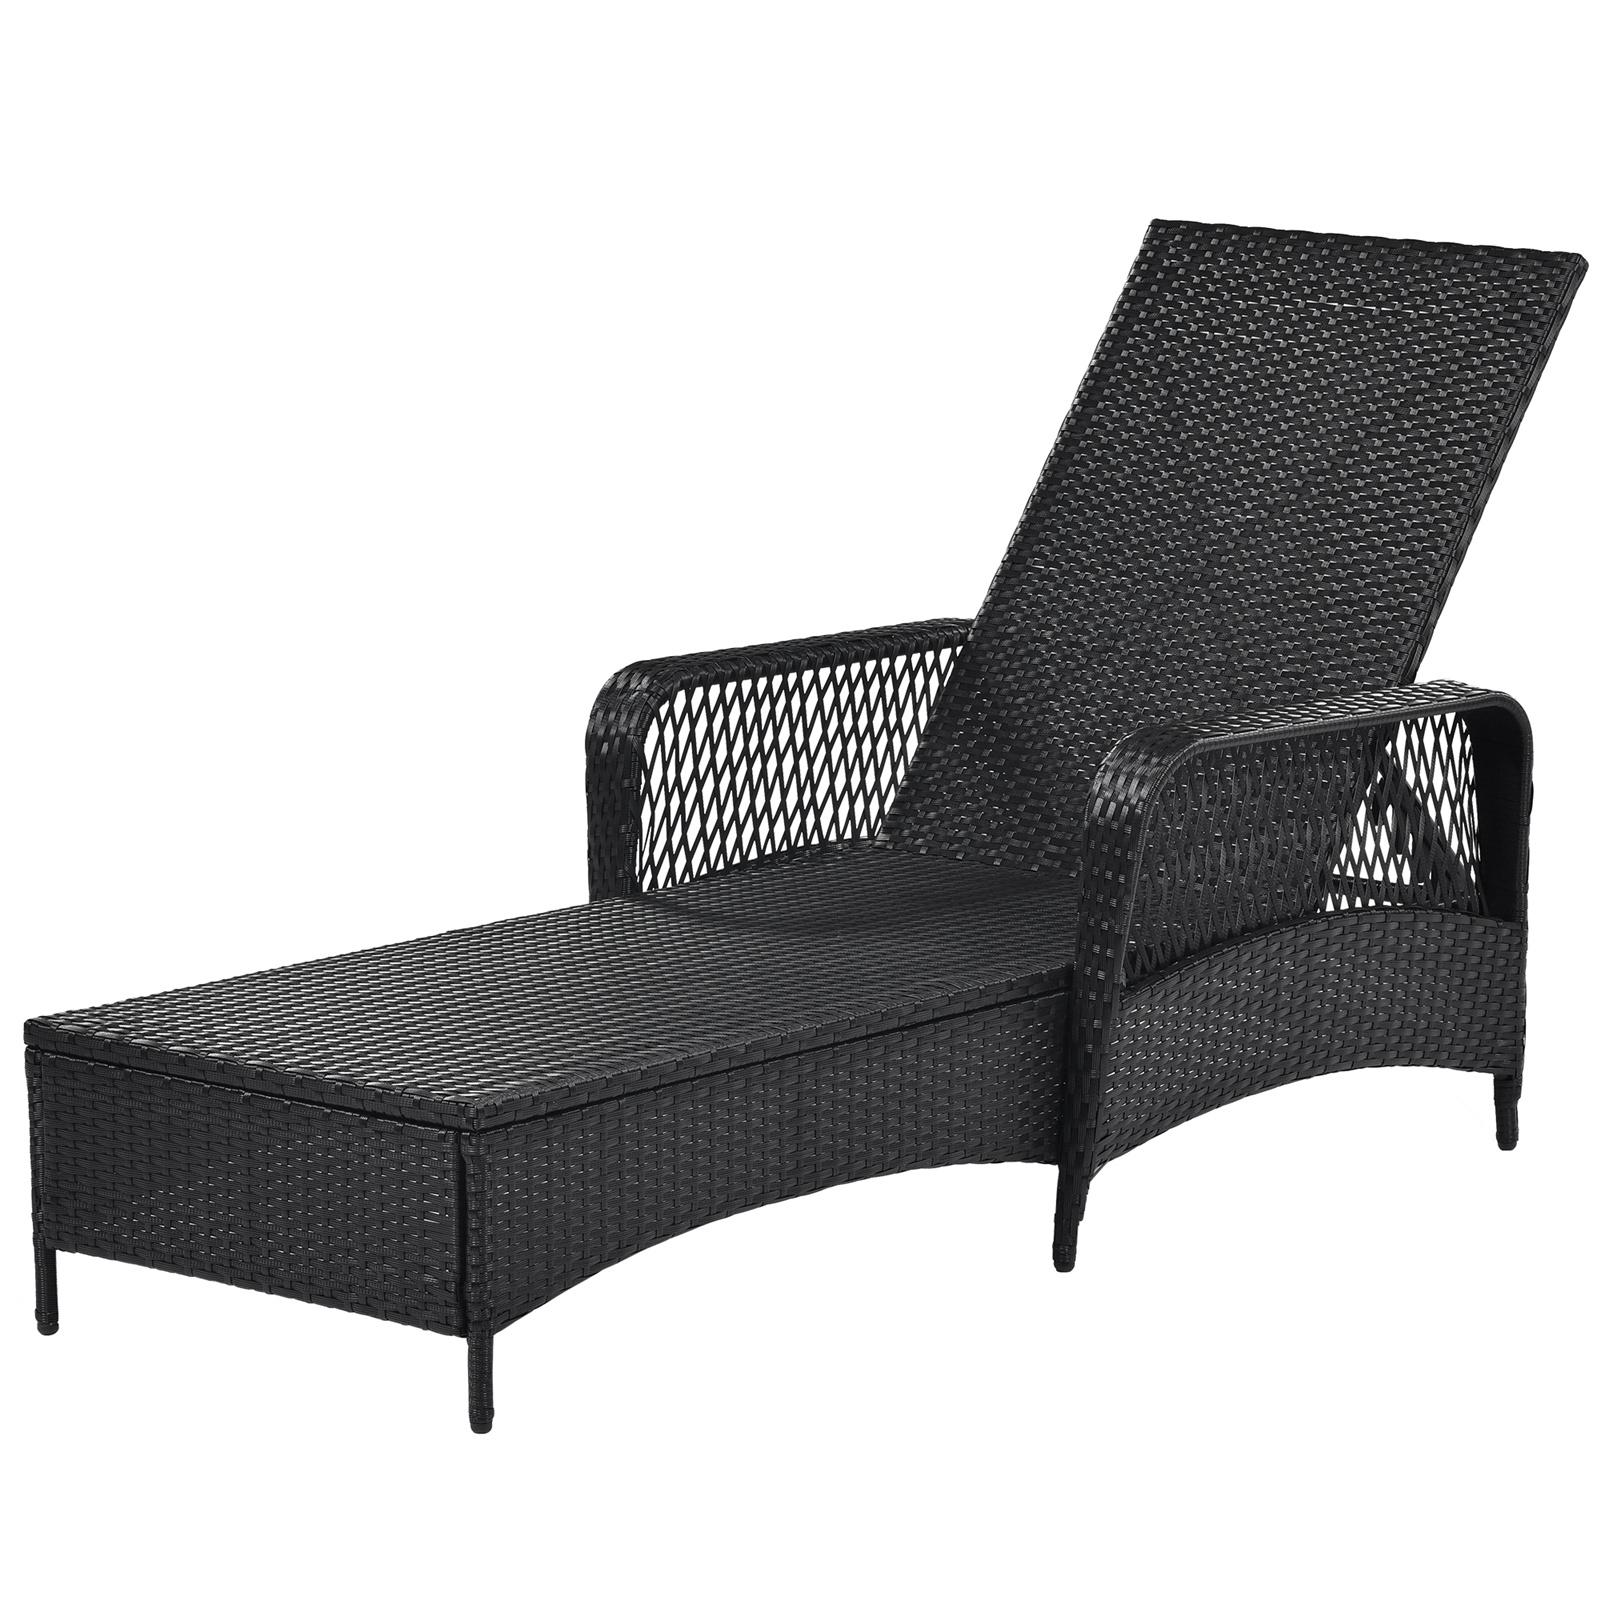 Beach Yard Pool Recliner Adjustable Patio Chaise Lounge Chair Outdoor Indoor for All Weather Outdoor patio pool PE rattan wicker chair wicker sun lounger, Black wiker, beige cushion - image 5 of 7